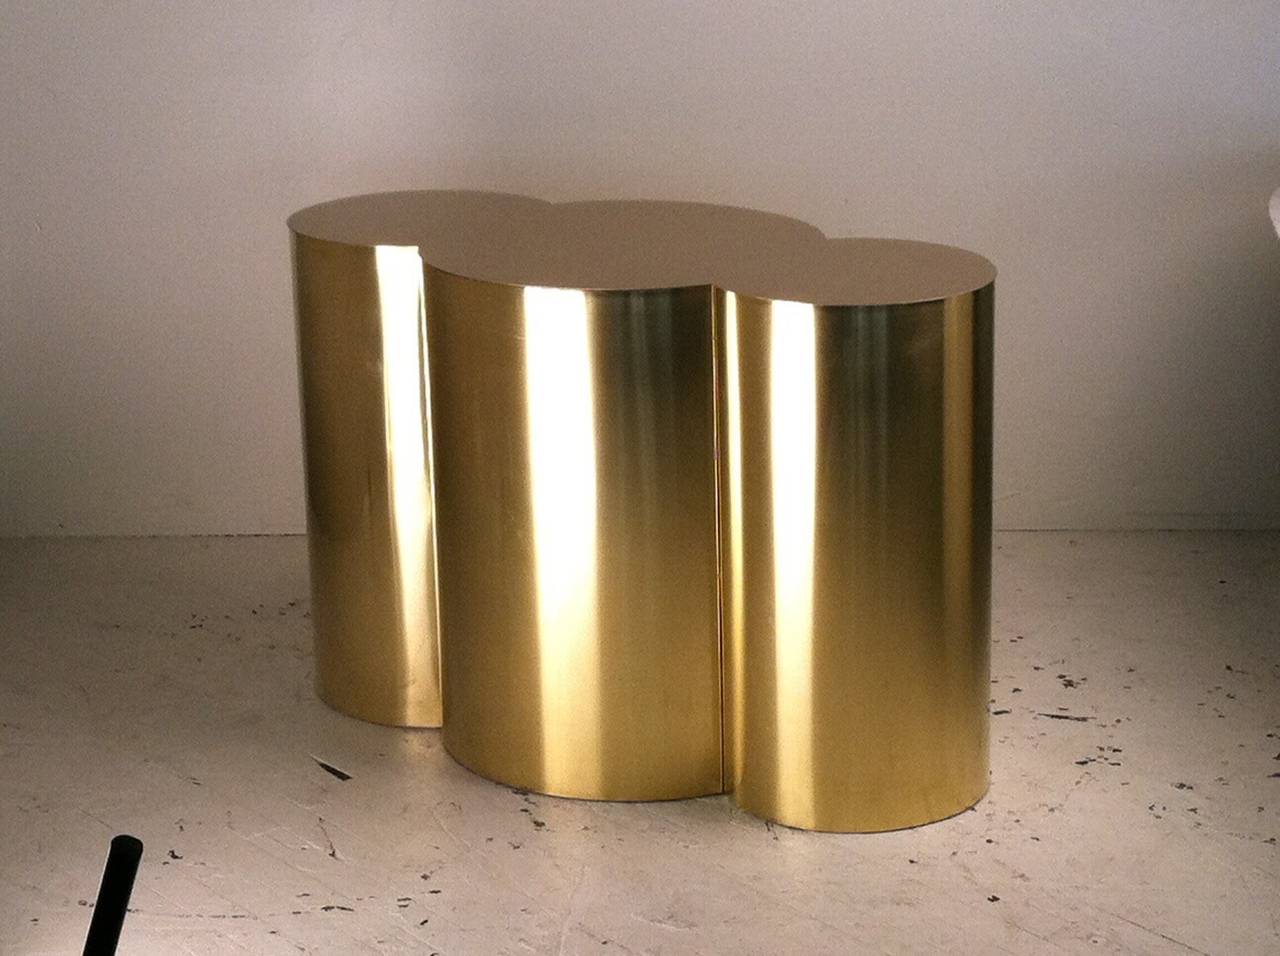 We offer white-glove delivery to NYC!

Incredible brass cloud dining table designed and manufactured exclusively for Refine Modern. Base is constructed of molded brass and is engineered to support a very thick, very large top (glass, granite,